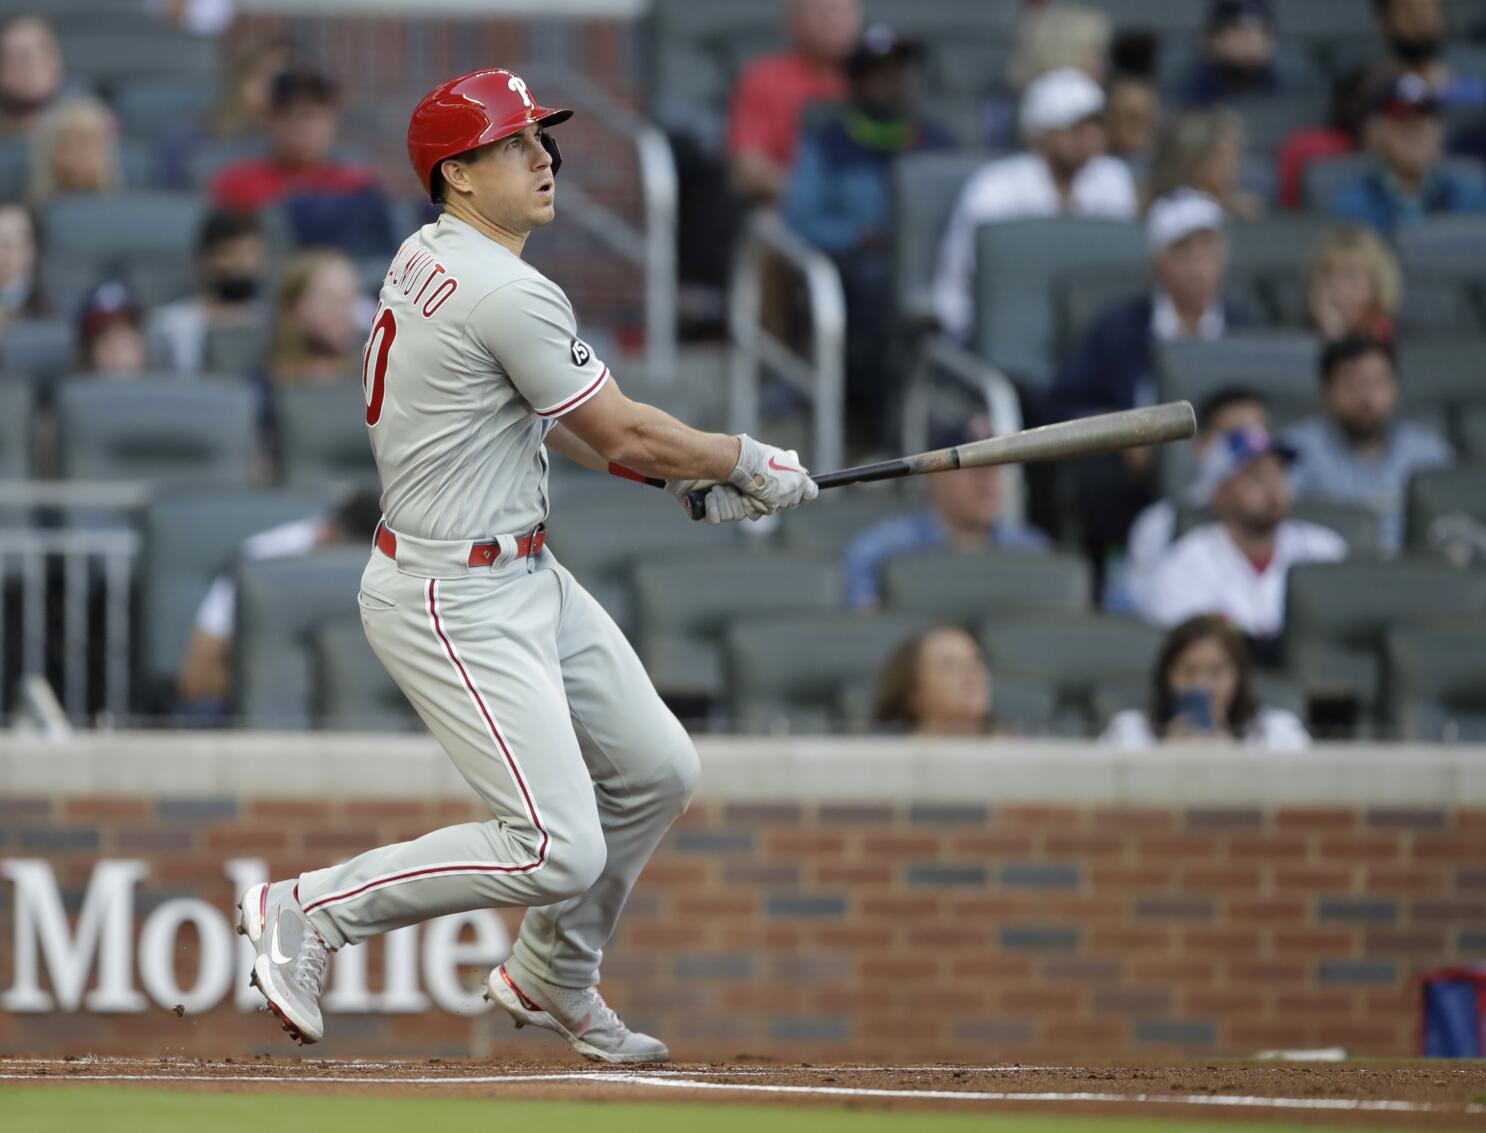 Good news at Phillies spring training about Realmuto injury